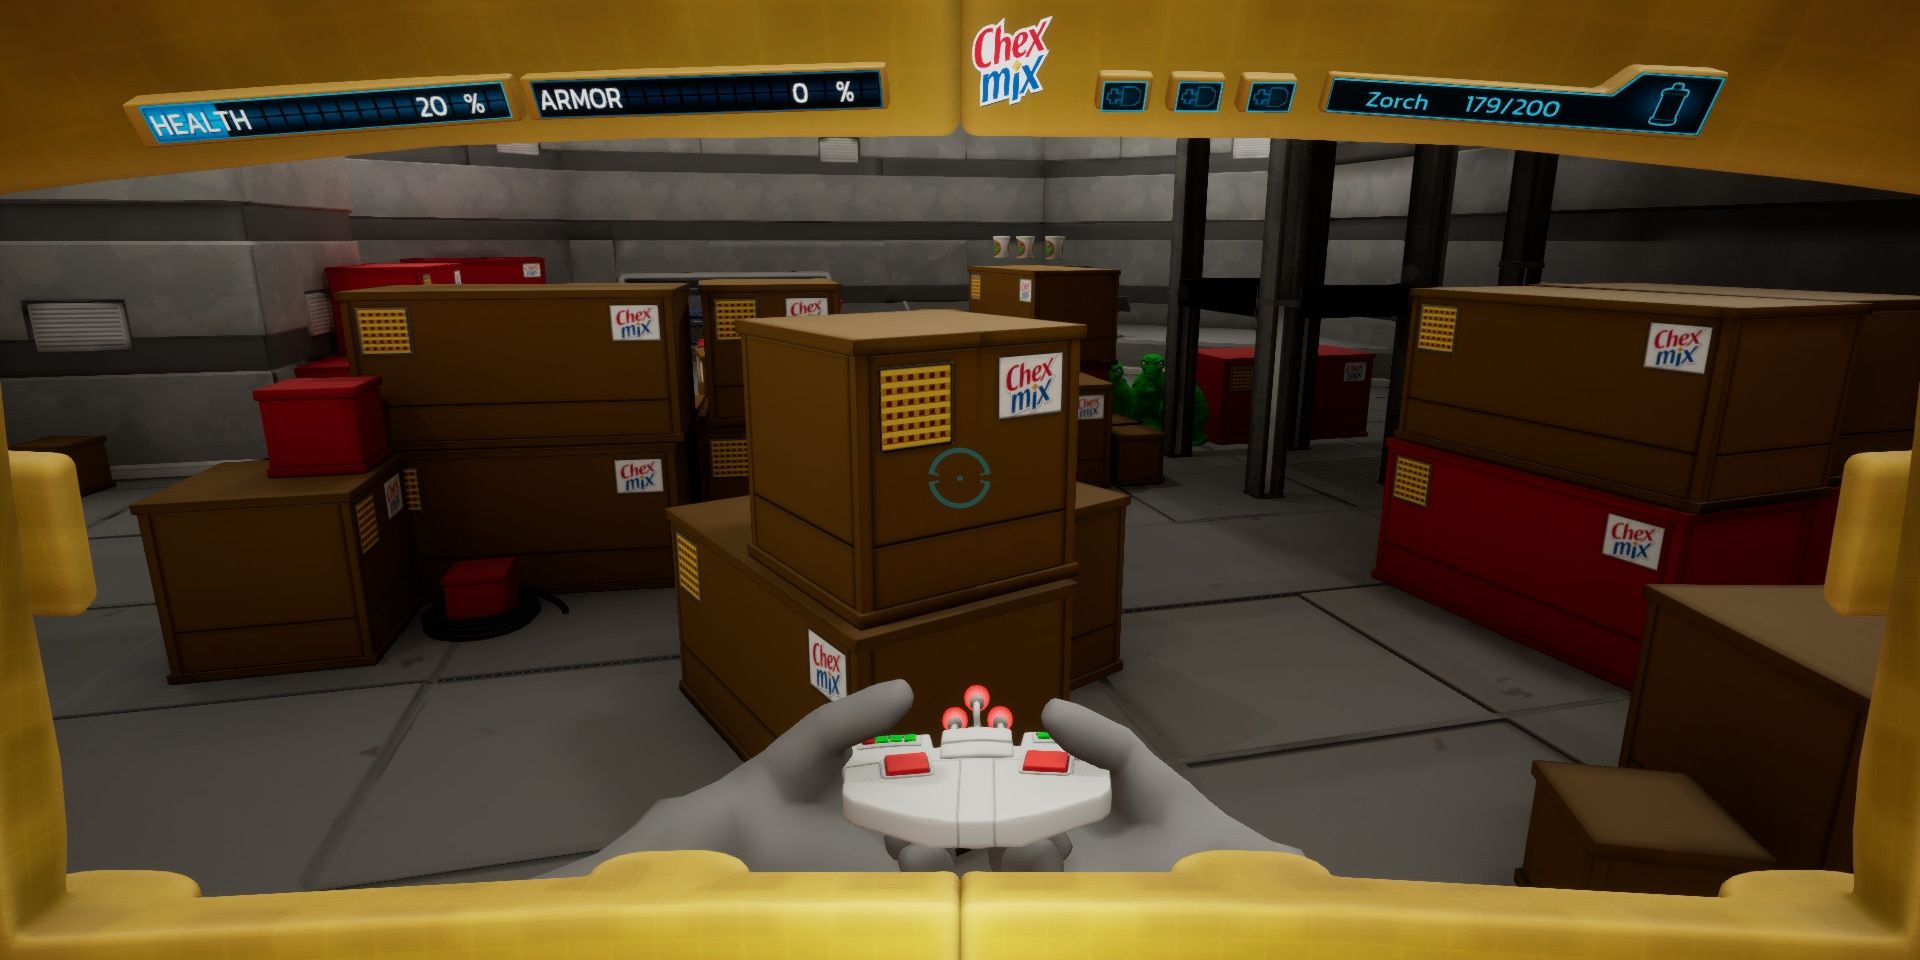 The player pointing a zorcher at boxes that say "Chex Mix" on them in Chex Quest HD